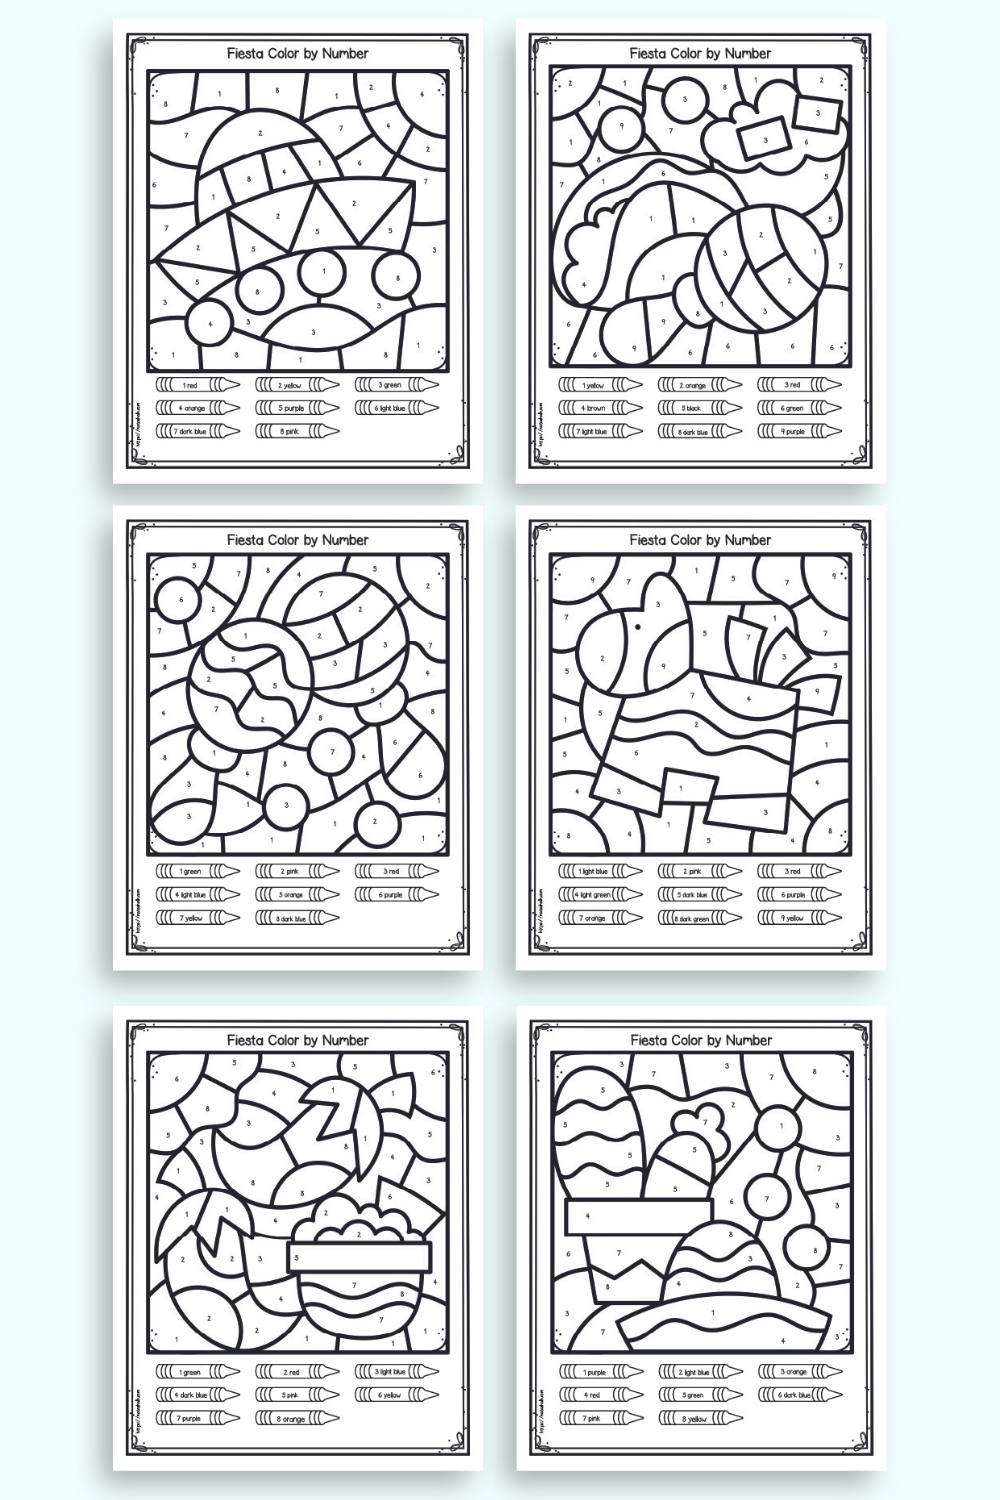 A preview of six pages of printable cinco de mayo themed color by number pages with numbers 1-9